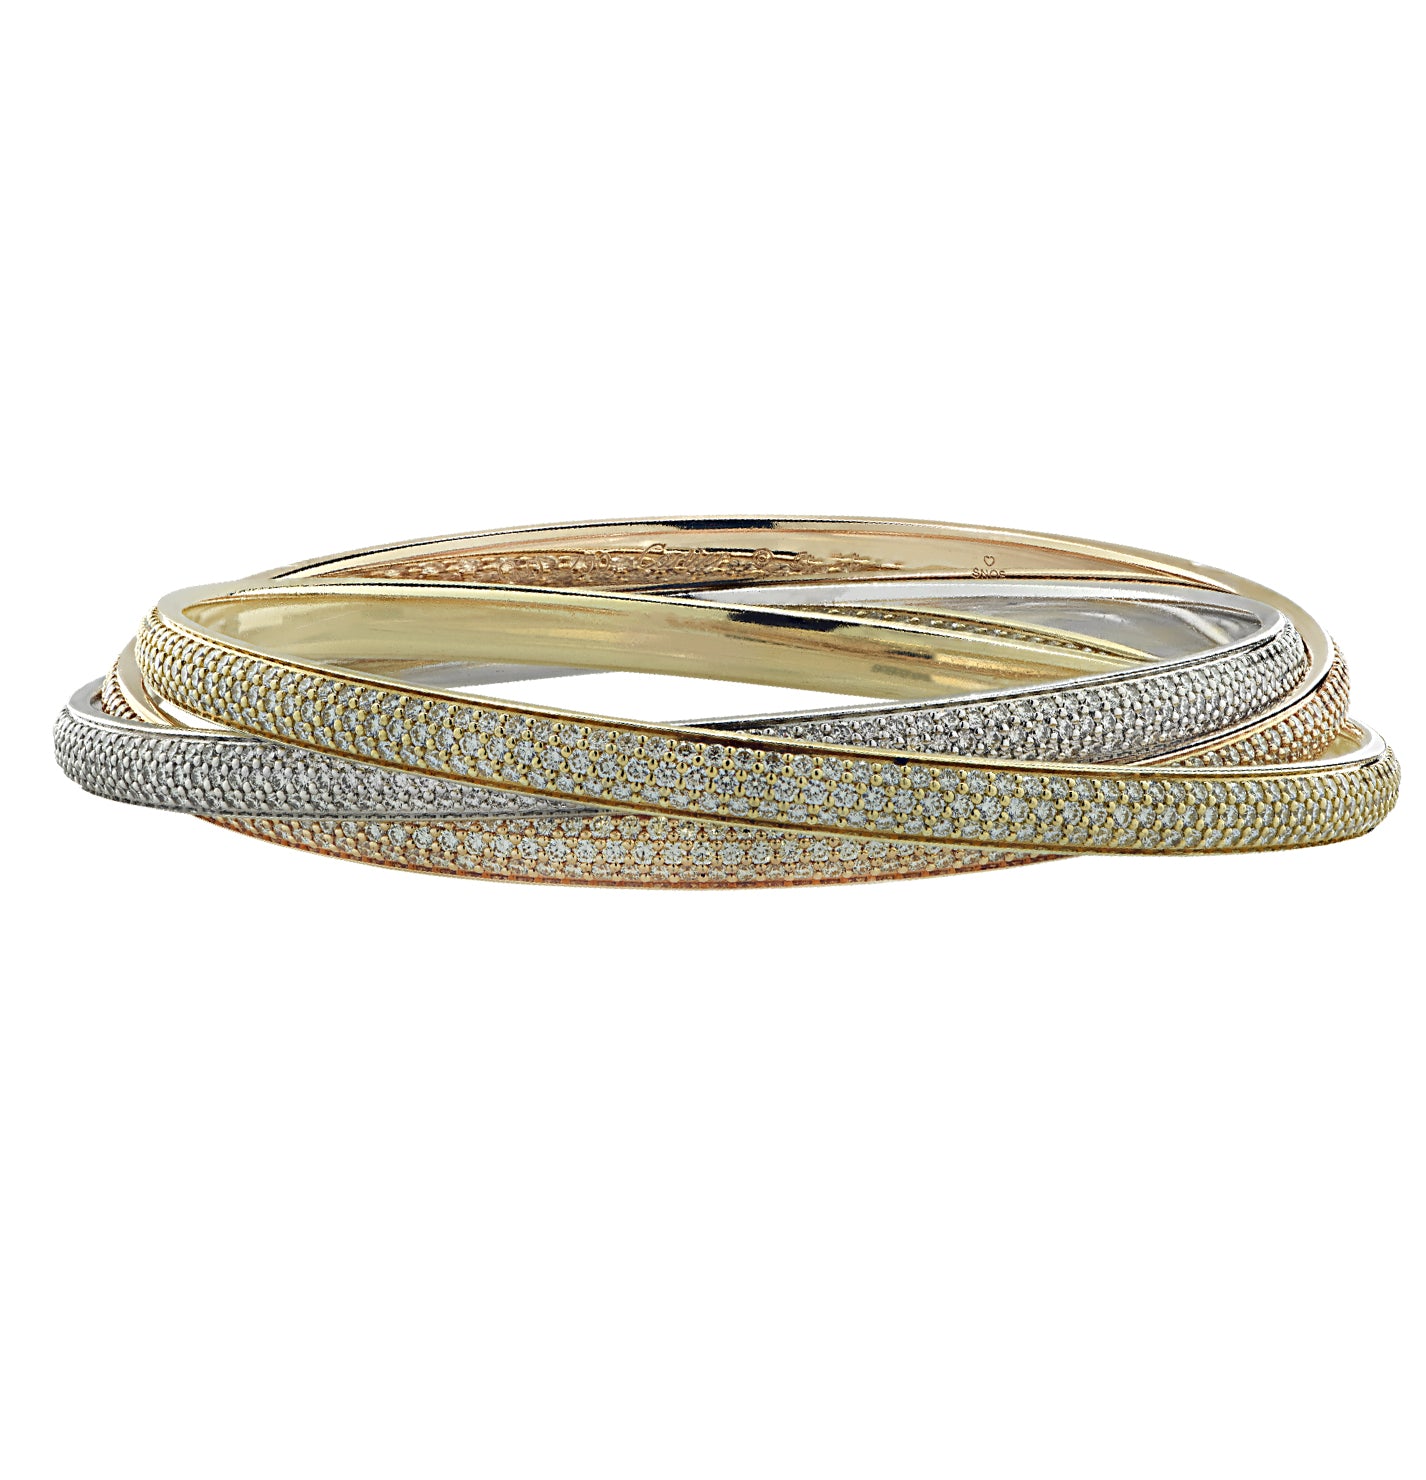 CRB6067817 - Trinity bracelet - White gold, rose gold, yellow gold - Cartier